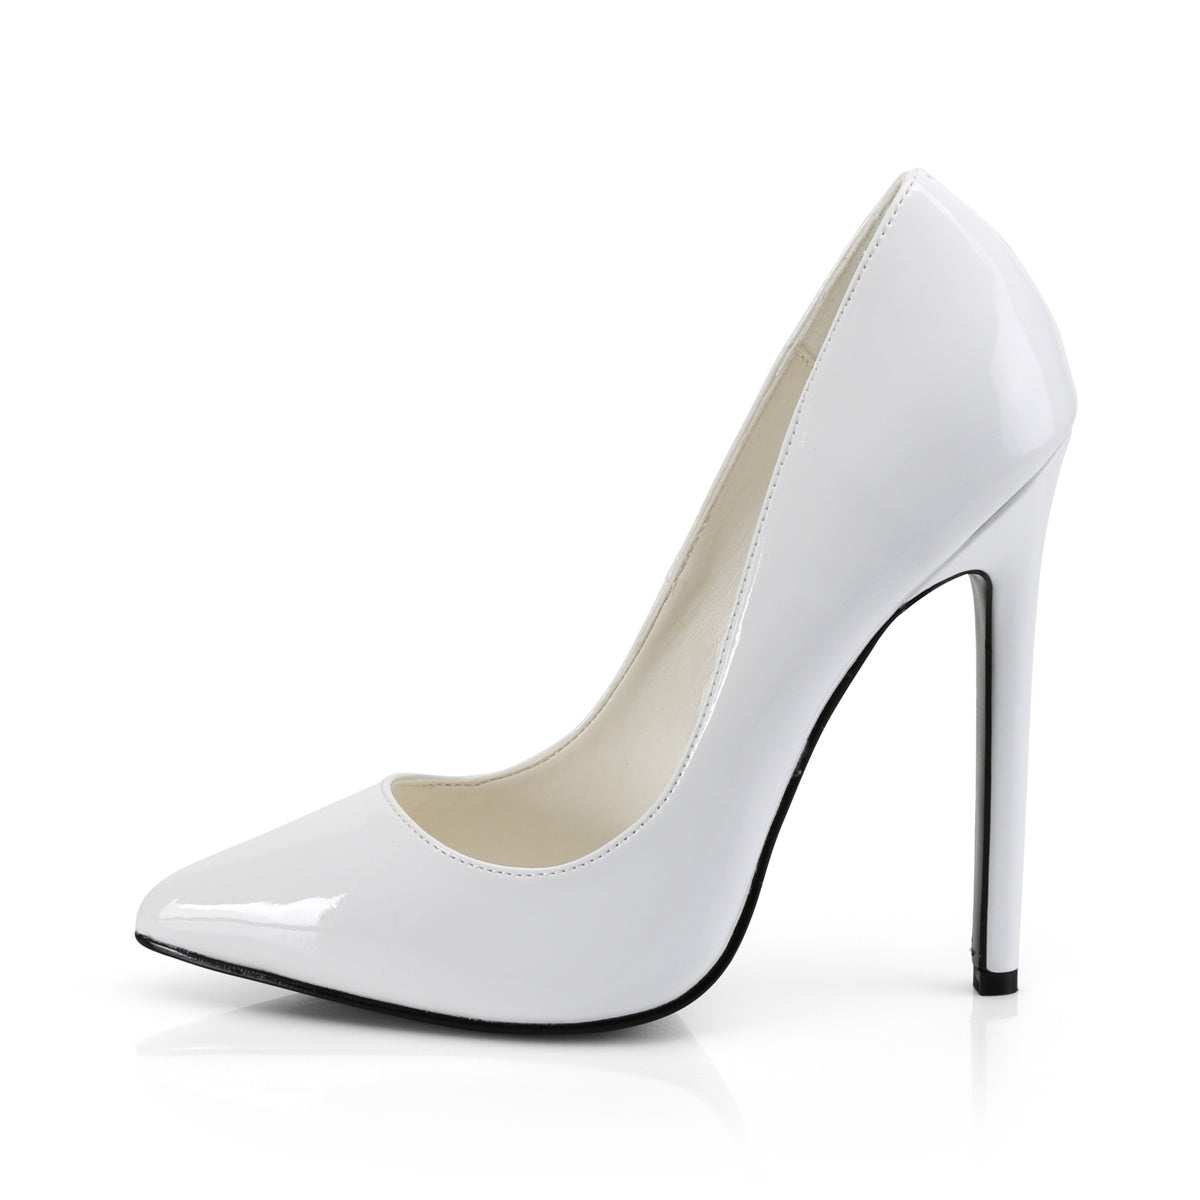 Pleaser Womens Pumps SEXY-20 Wht Pat